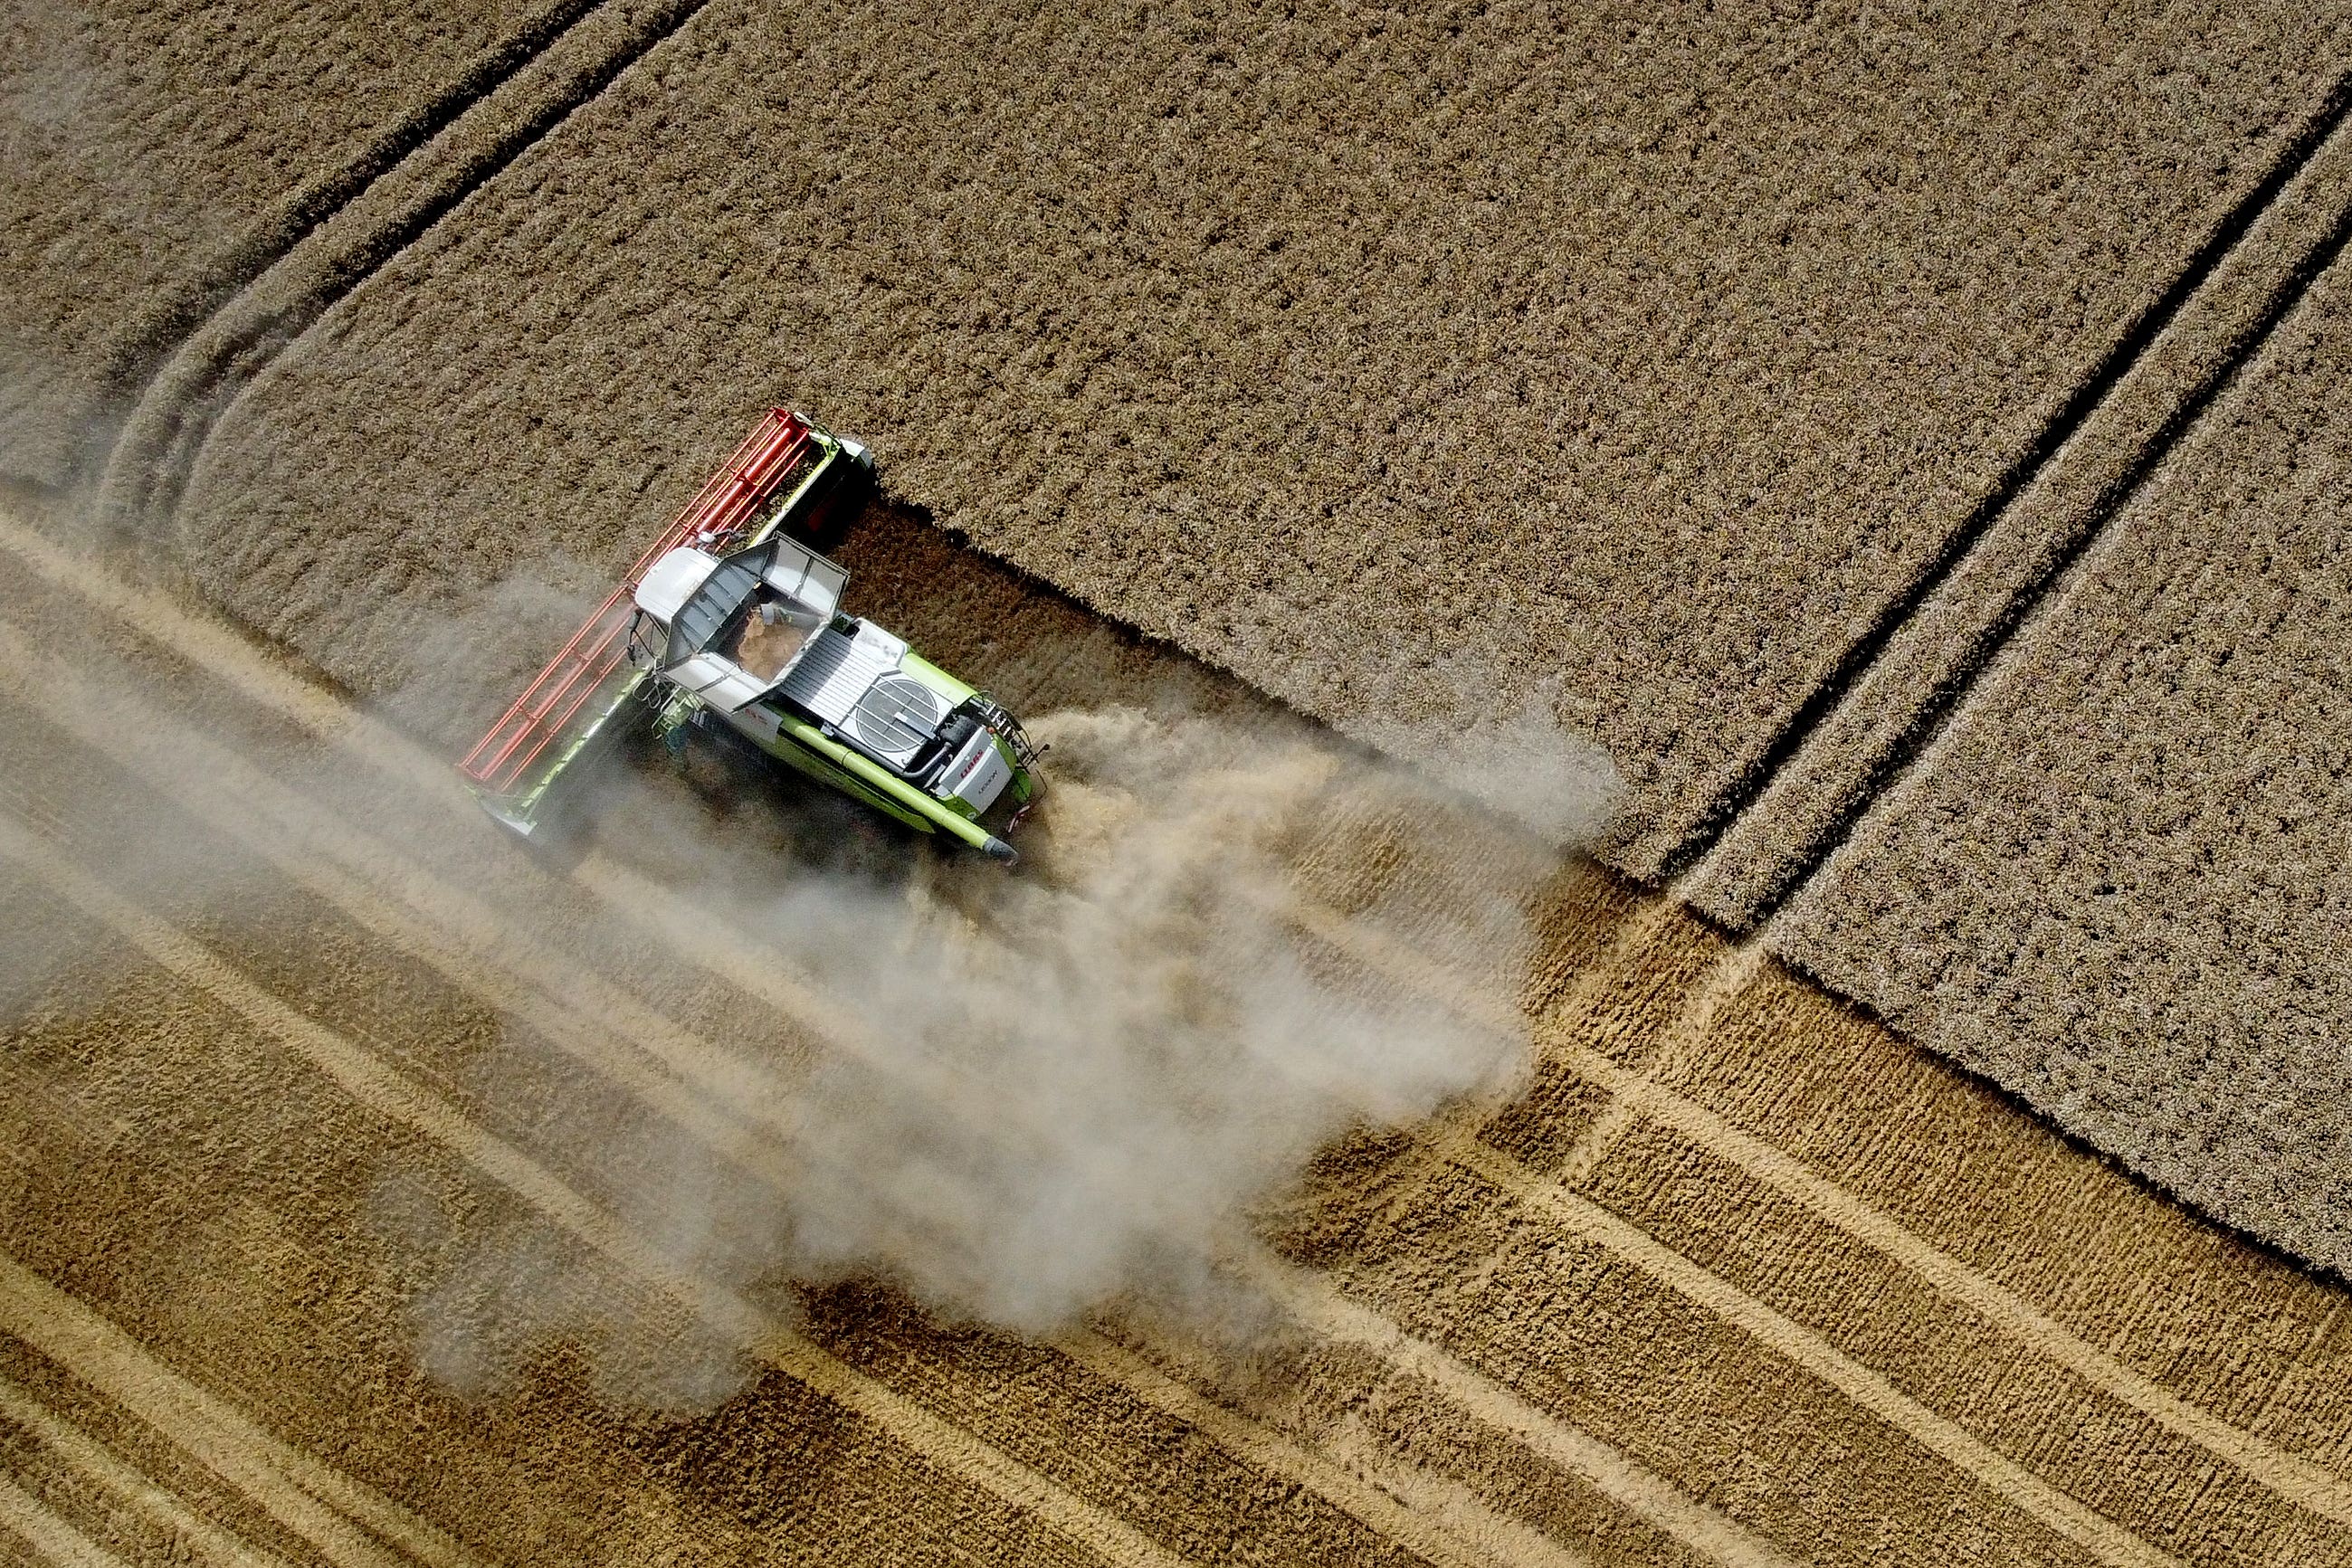 The ‘atrocious’ harvest weather could spoil barley and wheat crops this summer, the NFU has warned (Gareth Fuller/PA)